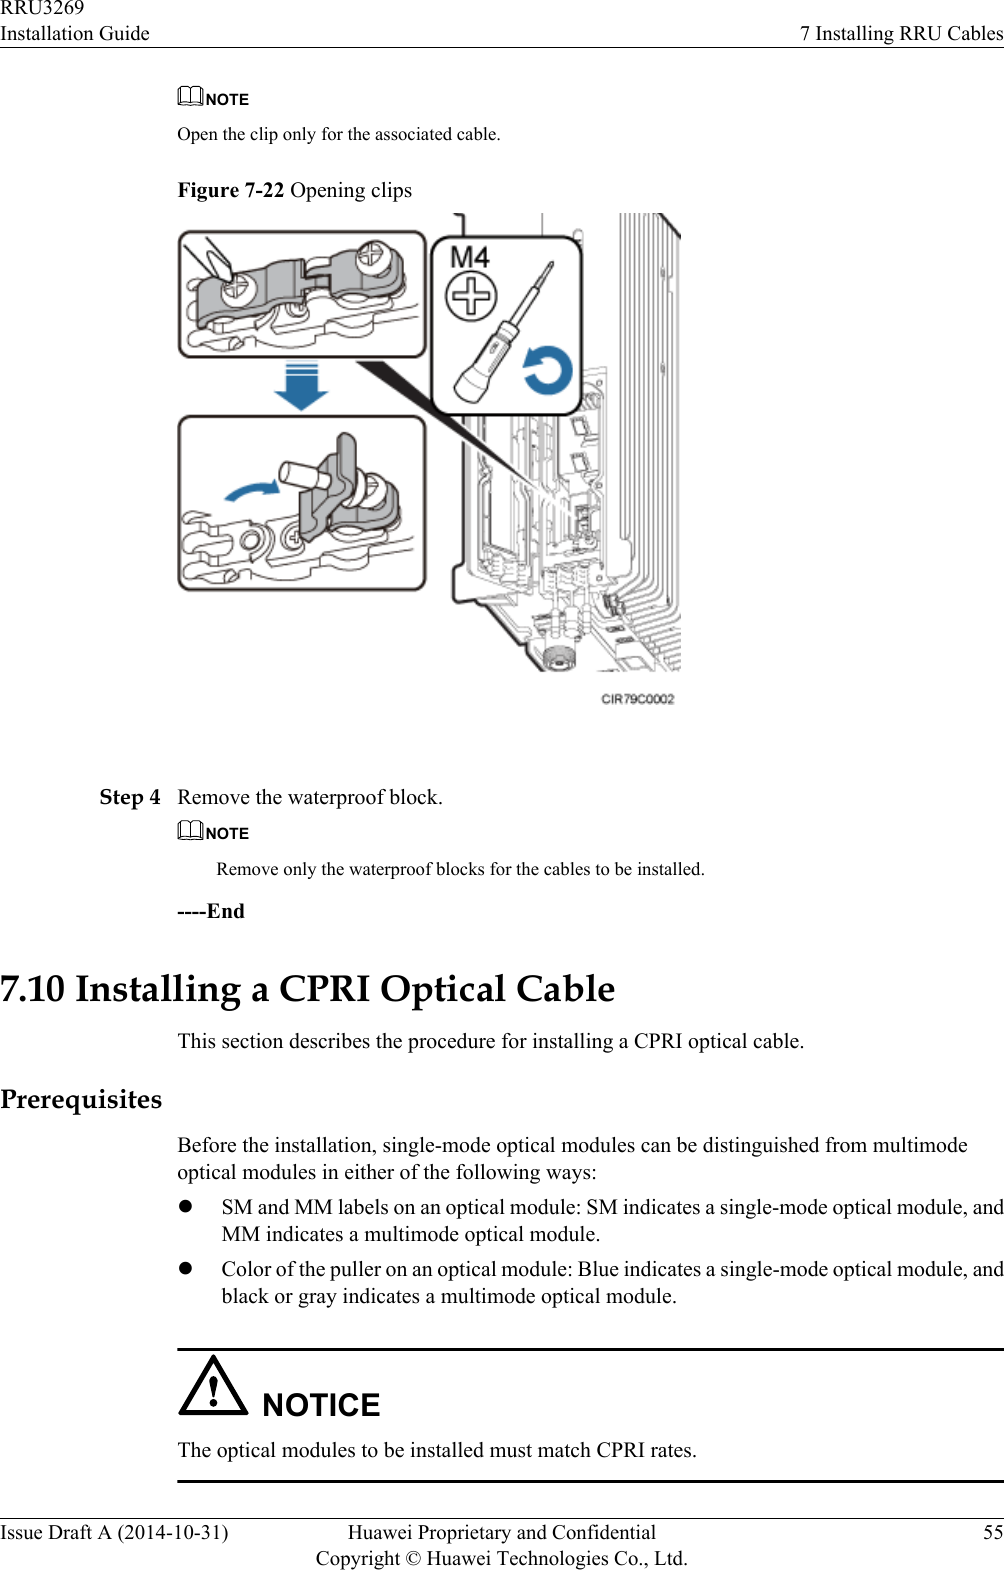 NOTEOpen the clip only for the associated cable.Figure 7-22 Opening clips Step 4 Remove the waterproof block.NOTERemove only the waterproof blocks for the cables to be installed.----End7.10 Installing a CPRI Optical CableThis section describes the procedure for installing a CPRI optical cable.PrerequisitesBefore the installation, single-mode optical modules can be distinguished from multimodeoptical modules in either of the following ways:lSM and MM labels on an optical module: SM indicates a single-mode optical module, andMM indicates a multimode optical module.lColor of the puller on an optical module: Blue indicates a single-mode optical module, andblack or gray indicates a multimode optical module.NOTICEThe optical modules to be installed must match CPRI rates.RRU3269Installation Guide 7 Installing RRU CablesIssue Draft A (2014-10-31) Huawei Proprietary and ConfidentialCopyright © Huawei Technologies Co., Ltd.55